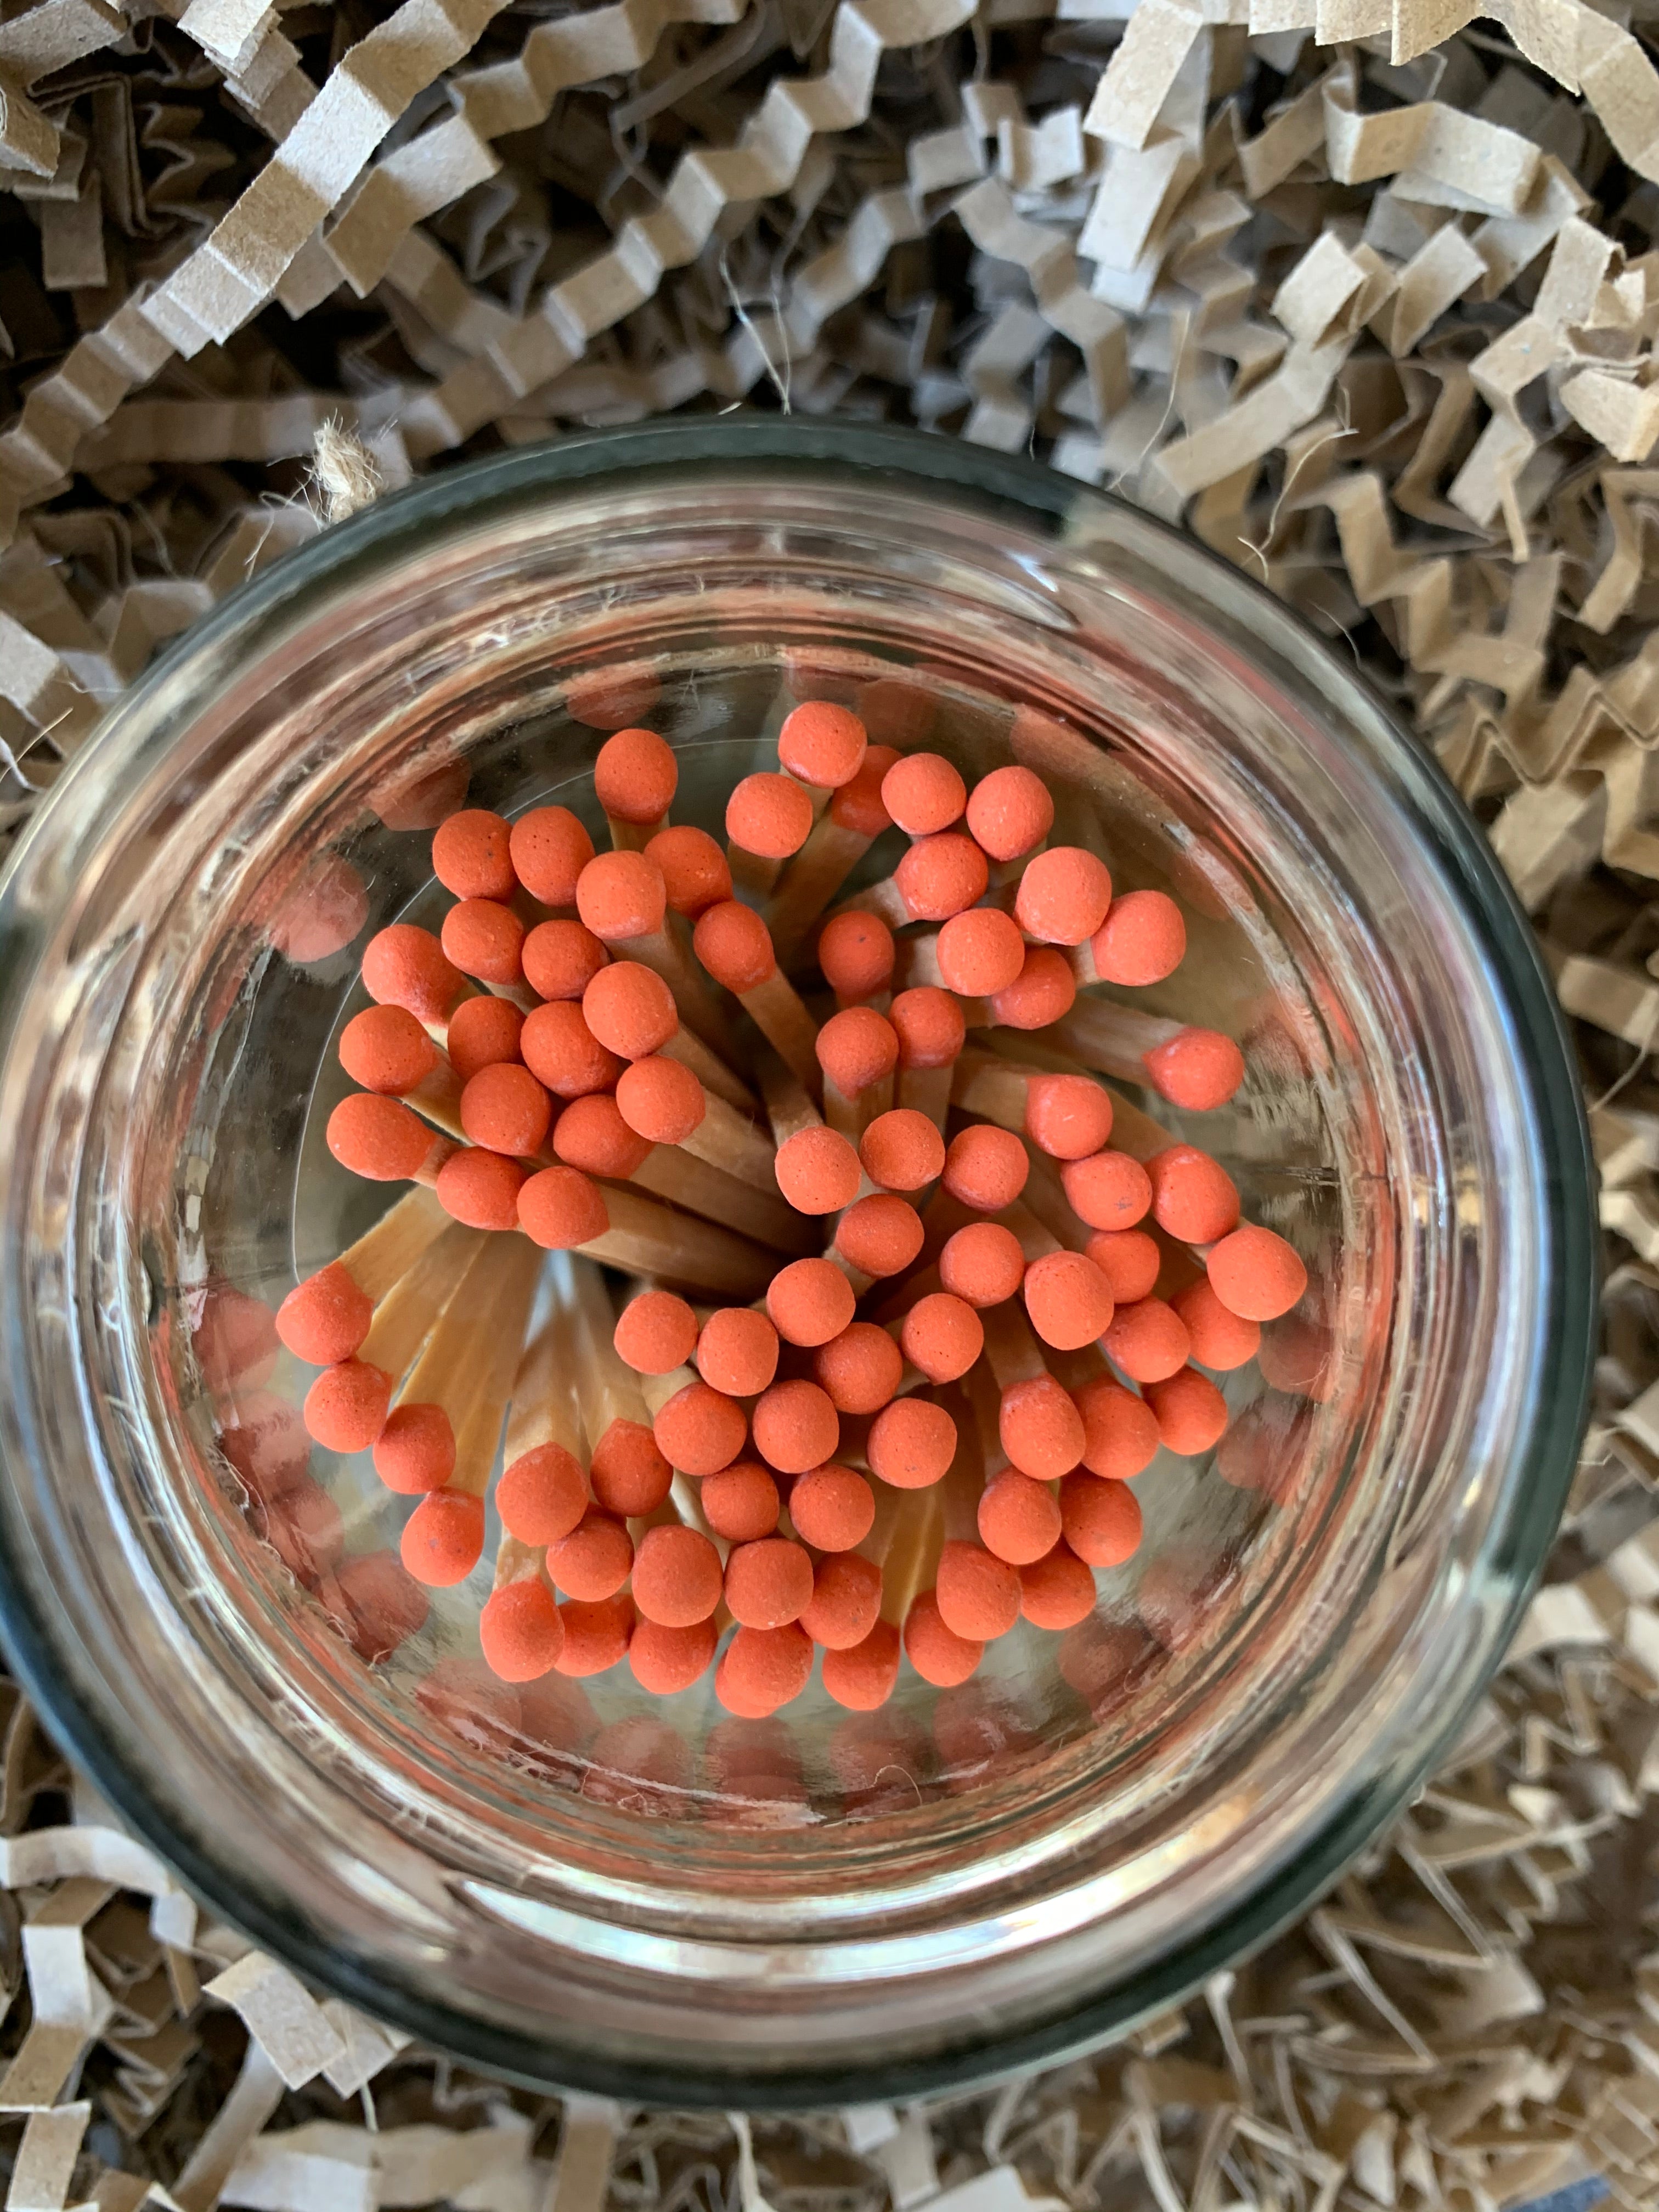 RED TIPPED SAFETY MATCHES IN VINTAGE STYLE GLASS JAR